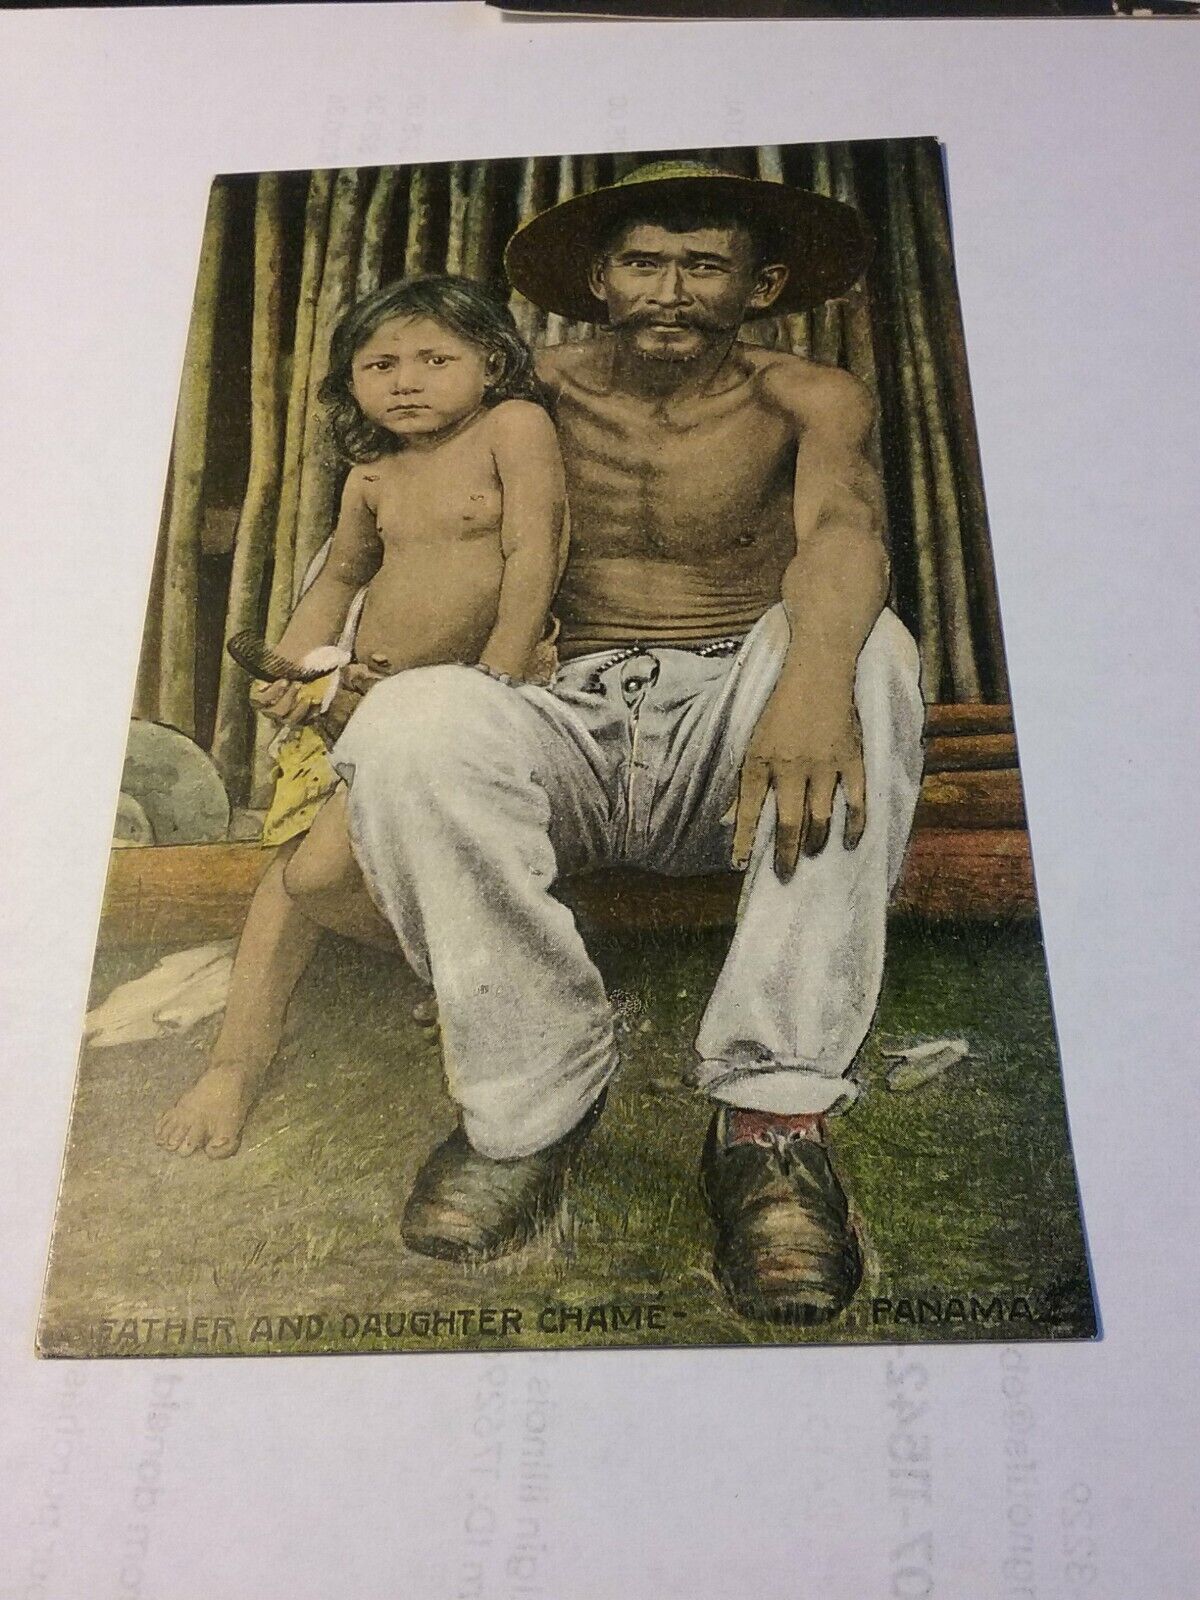 Panama Chame - Father and Daughter old I. L. Maduro published postcard